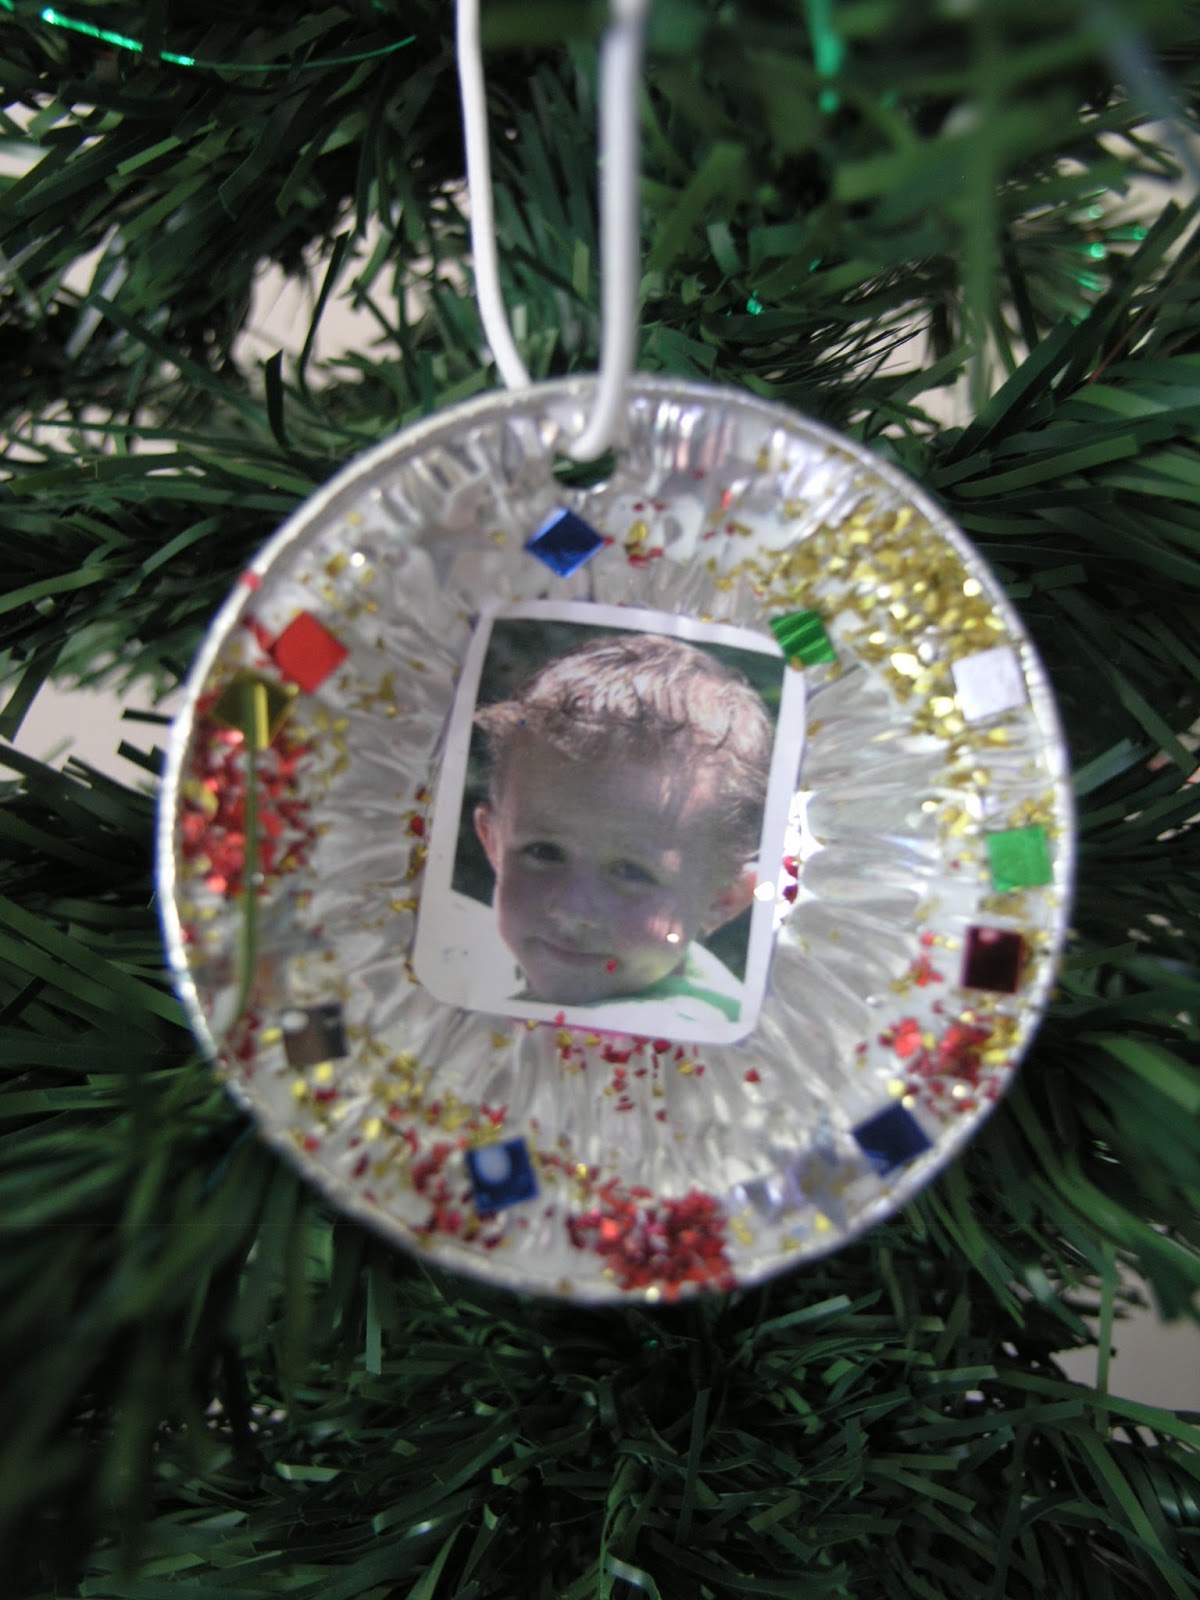 A Handmade Gift to put on the Christmas Tree - Clever Classroom Blog